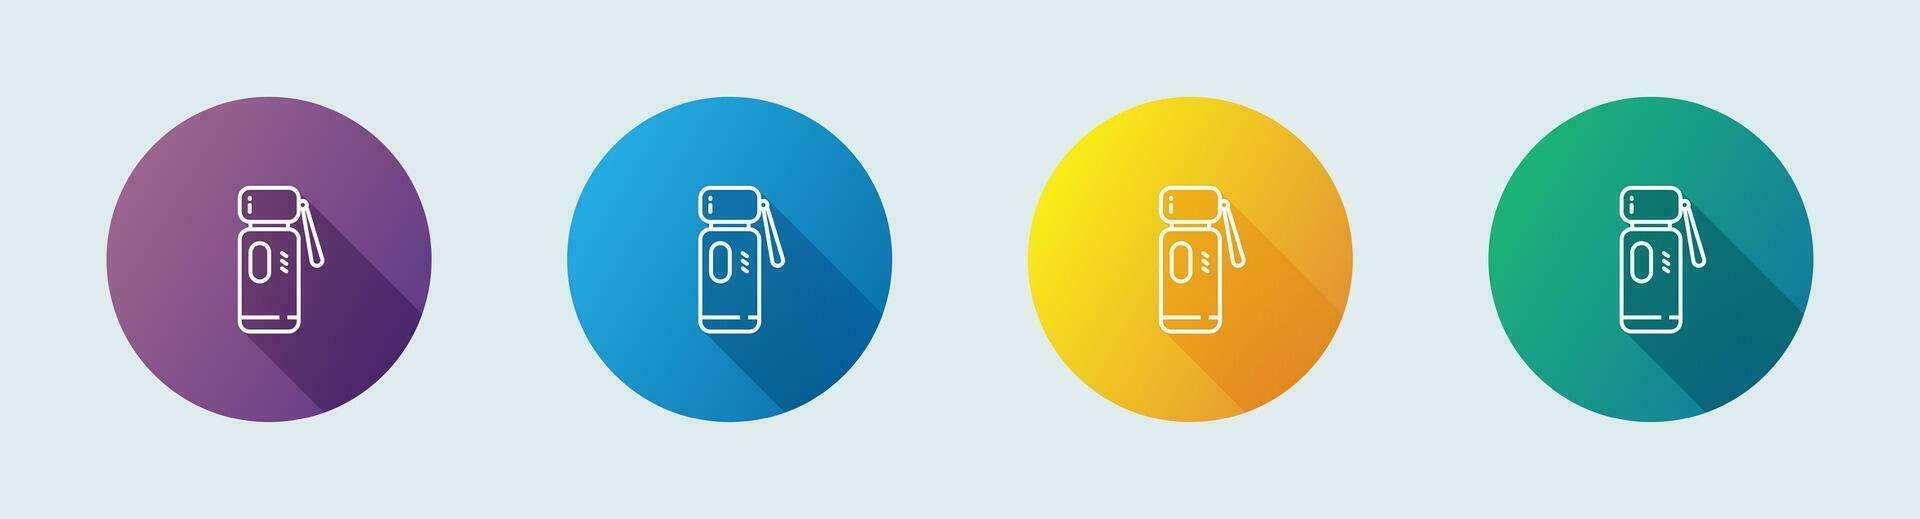 Thermos line icon in flat design style. Hot water signs vector illustration.